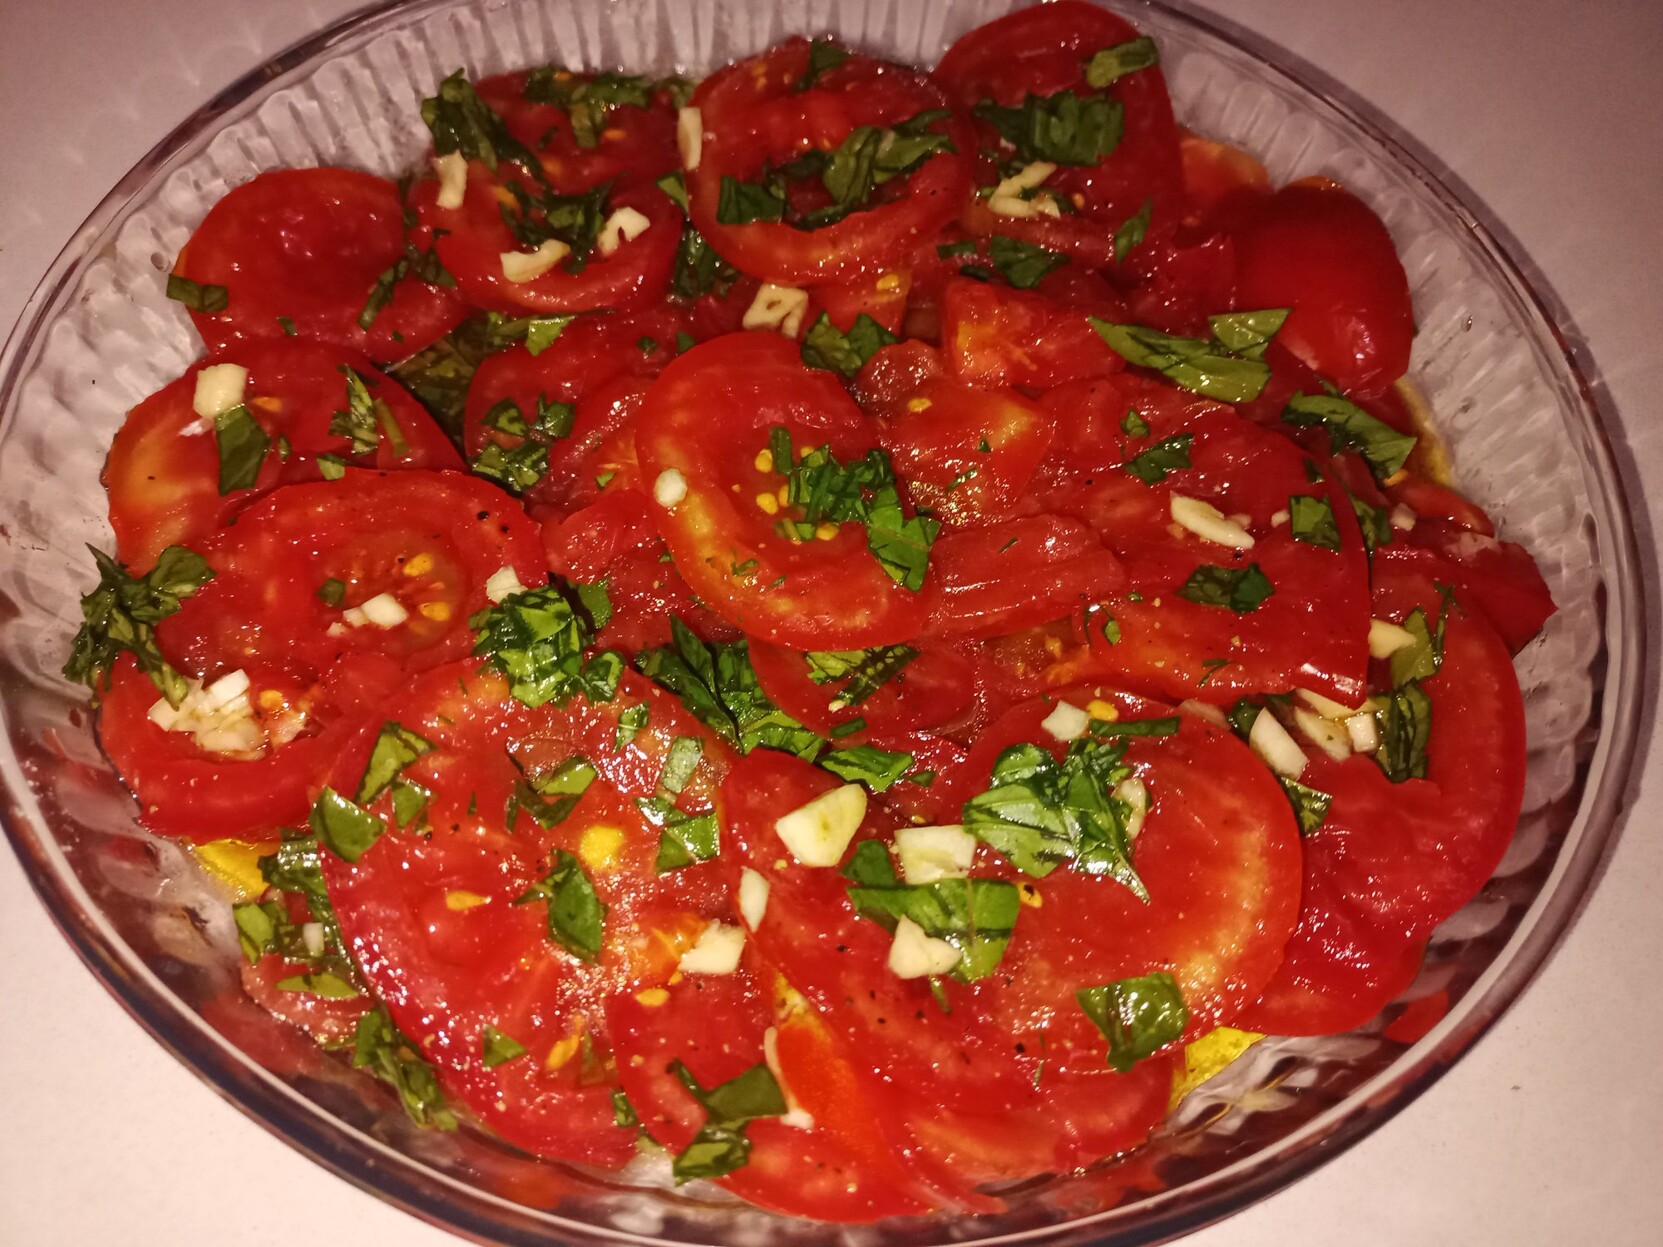 A plate of bright red tomatoes and chopped green basil leaves